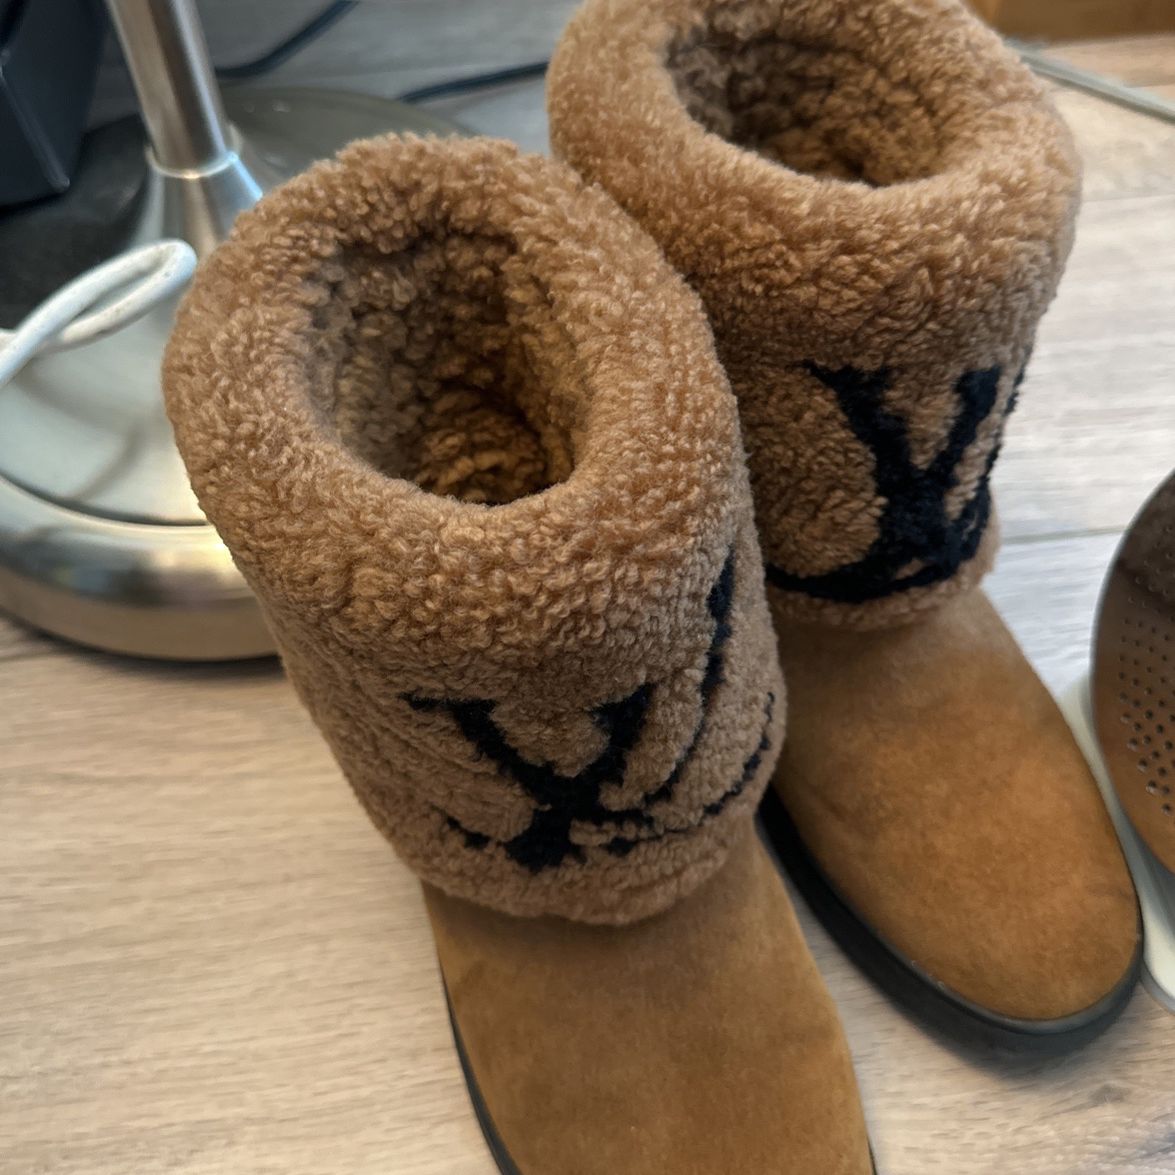 Mini Bailey Bow Ugg Boots LV Custom Canvas Boots for Sale in Los Angeles,  CA - OfferUp